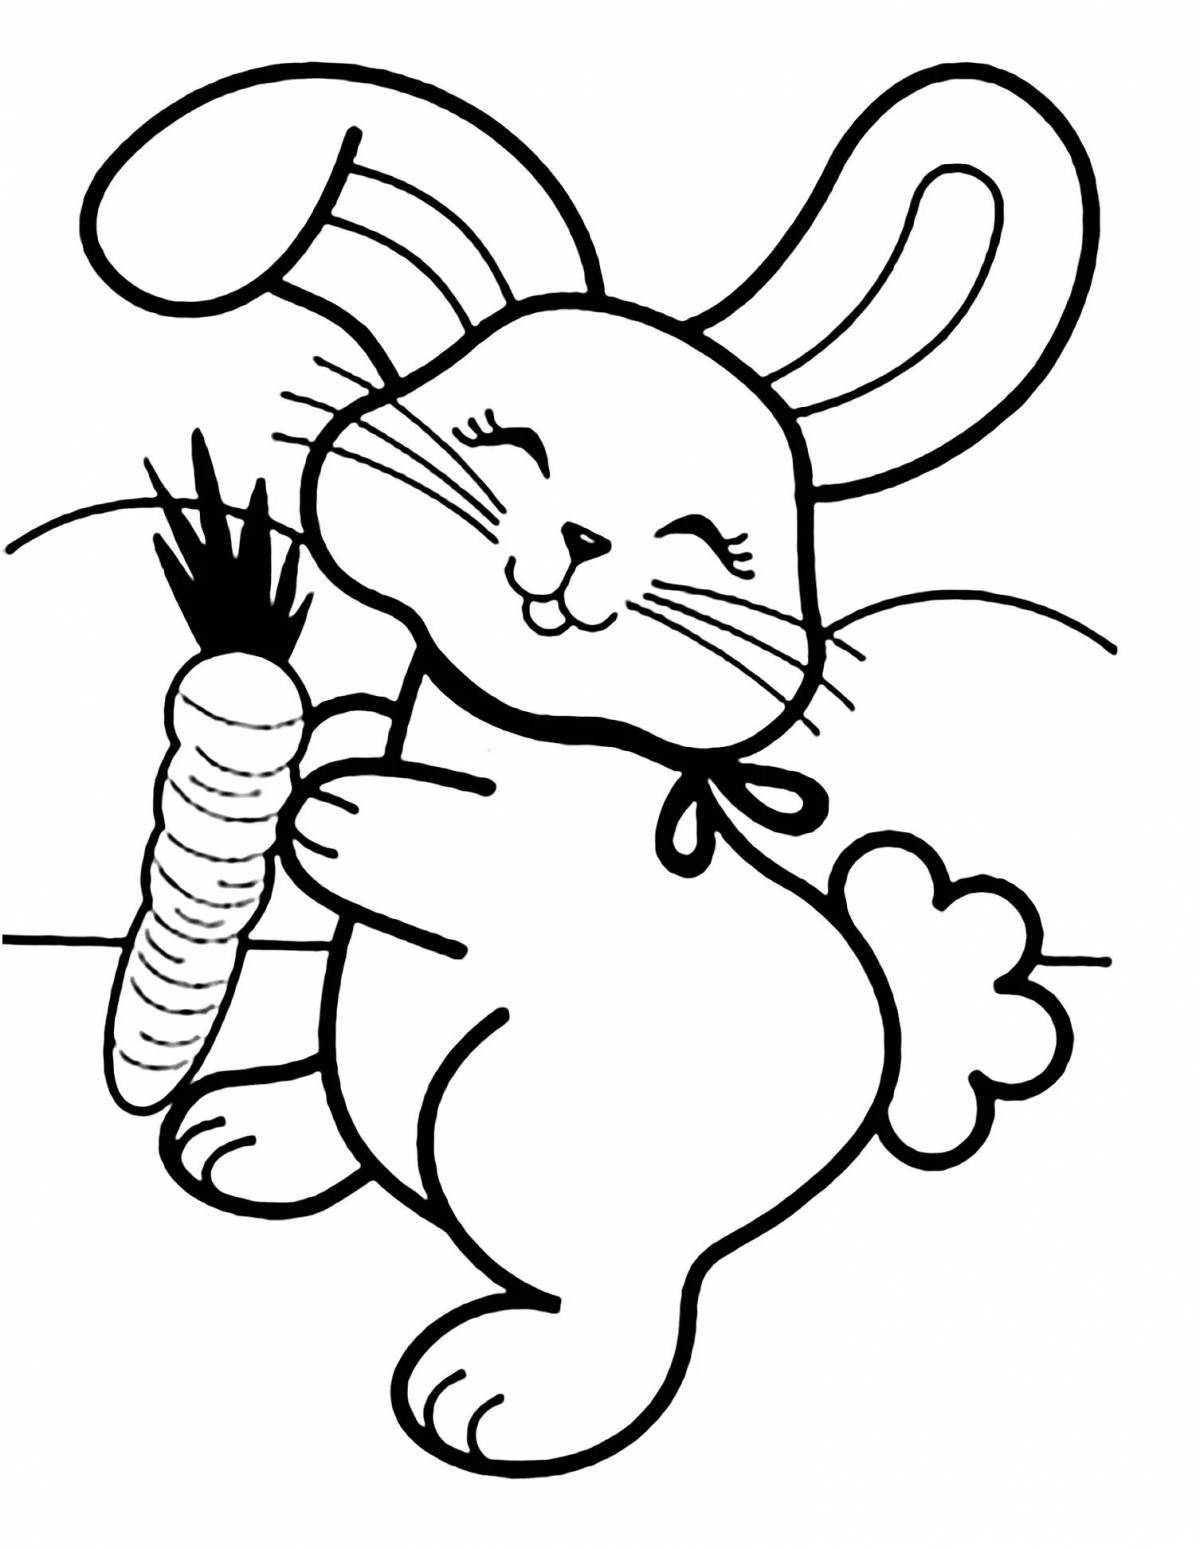 Blessed rabbit and cat coloring page